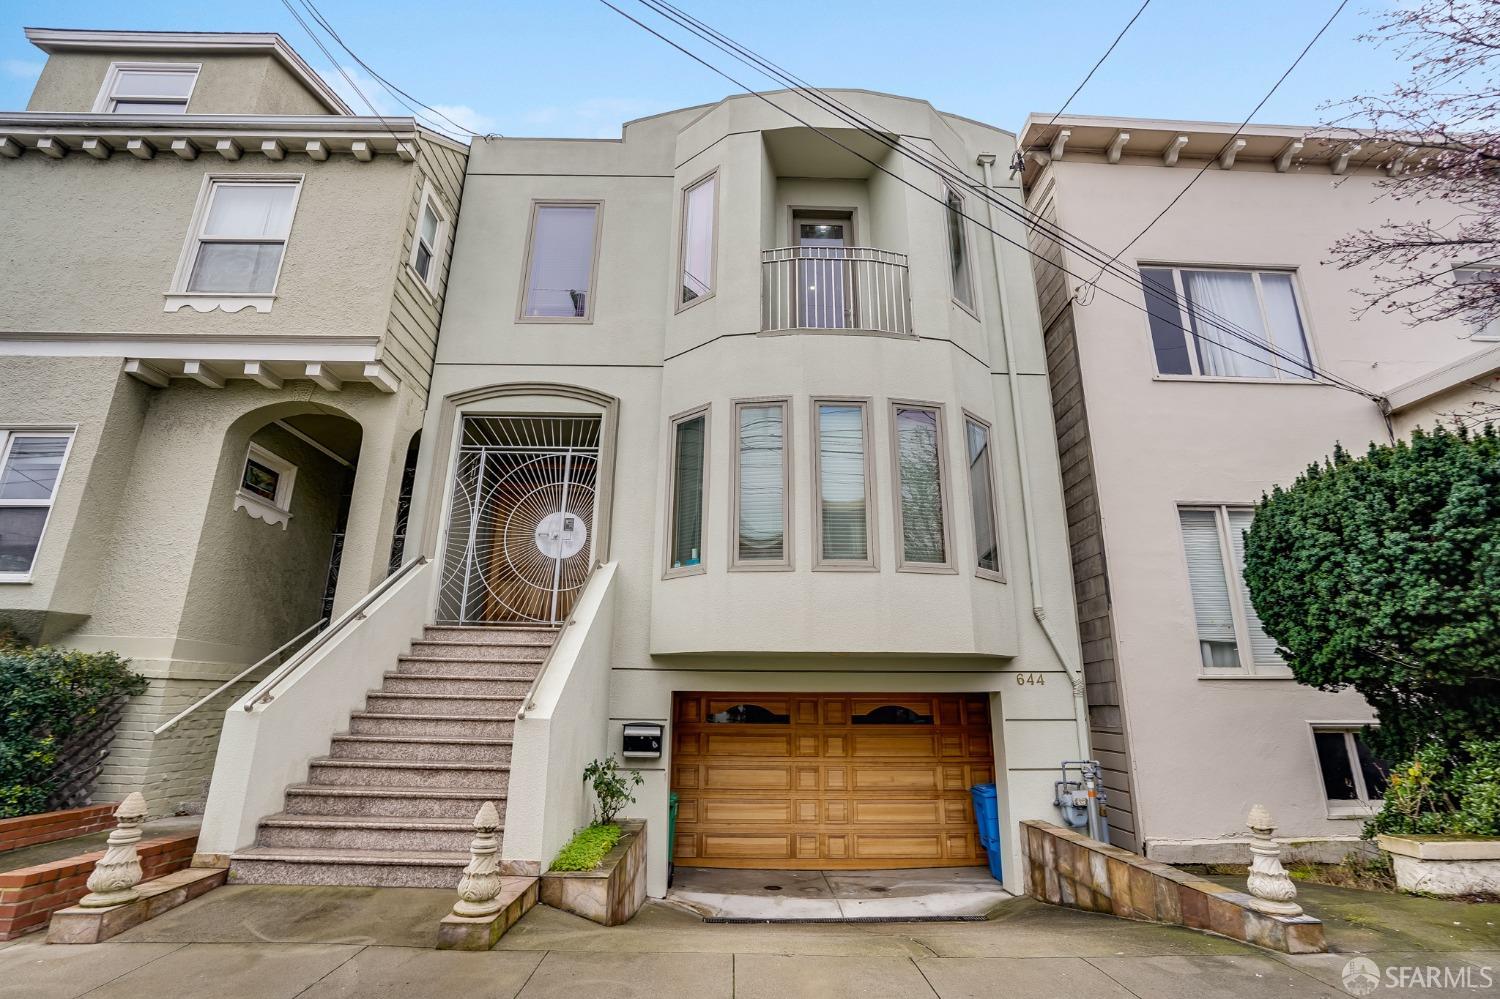 Photo of 644 Spruce St in San Francisco, CA